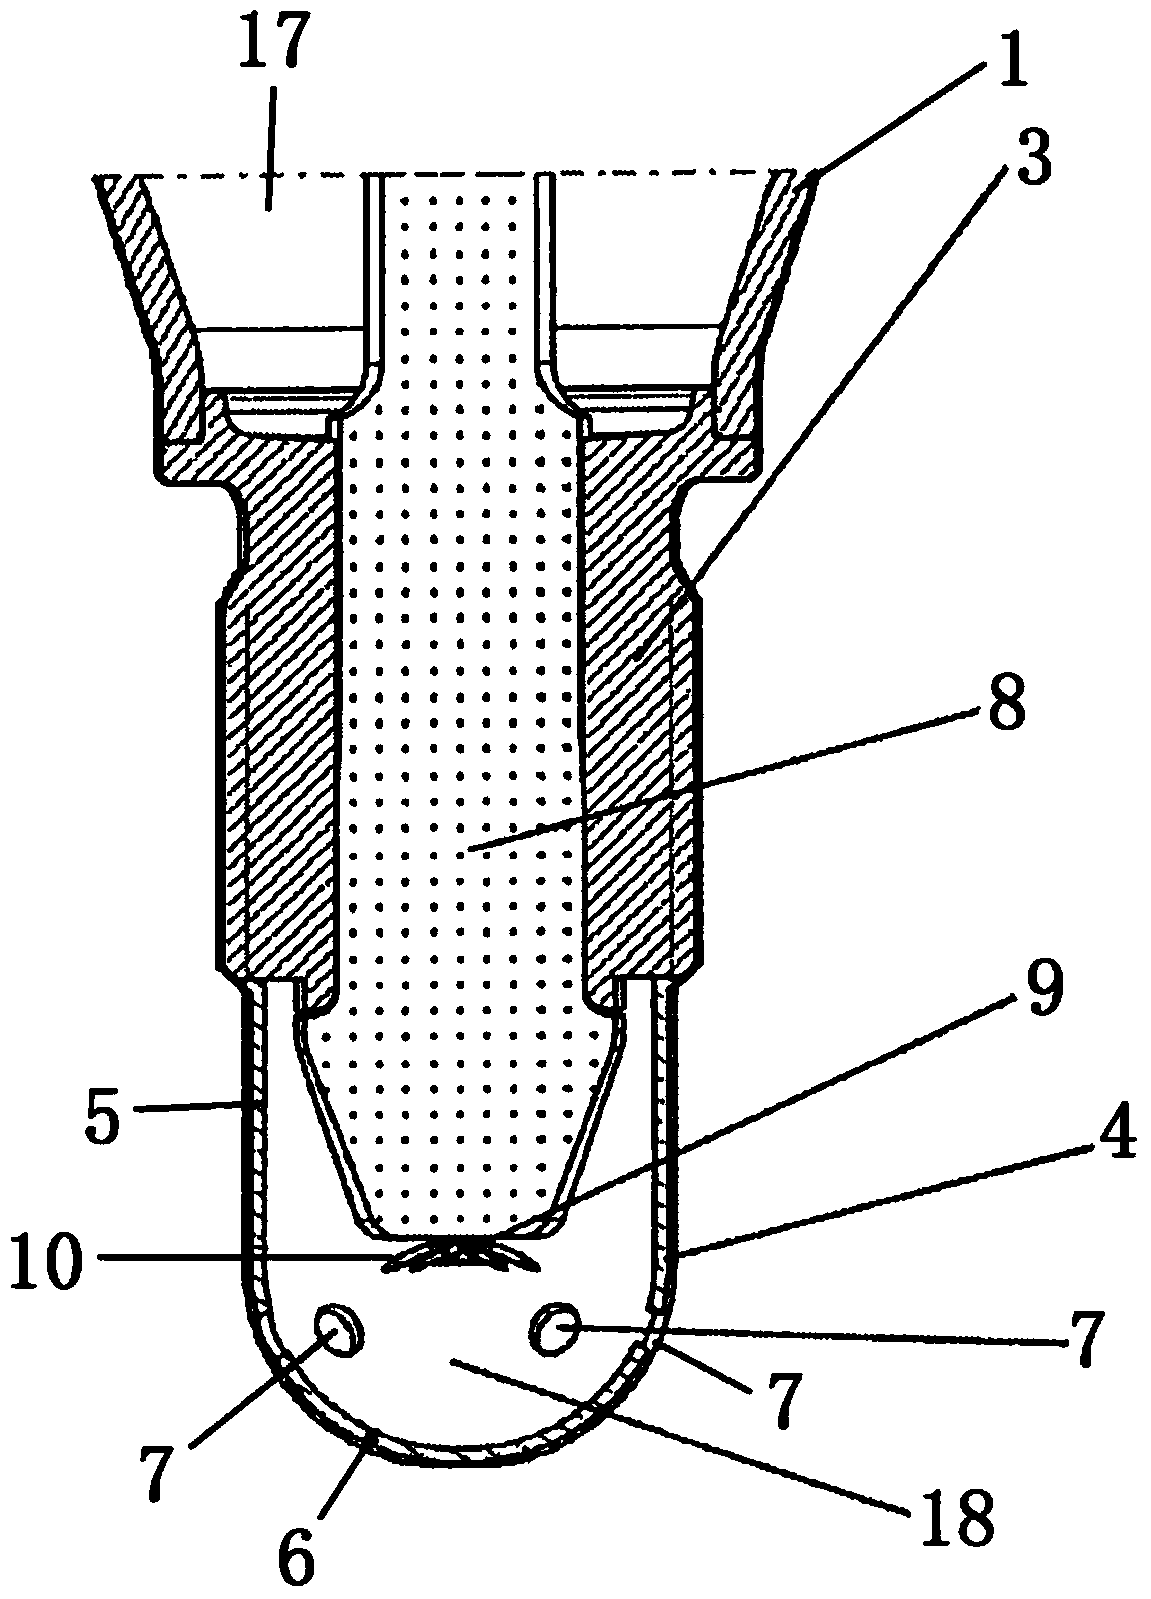 Ignition device for igniting fuel-air mixture in internal combustion engines by corona discharge